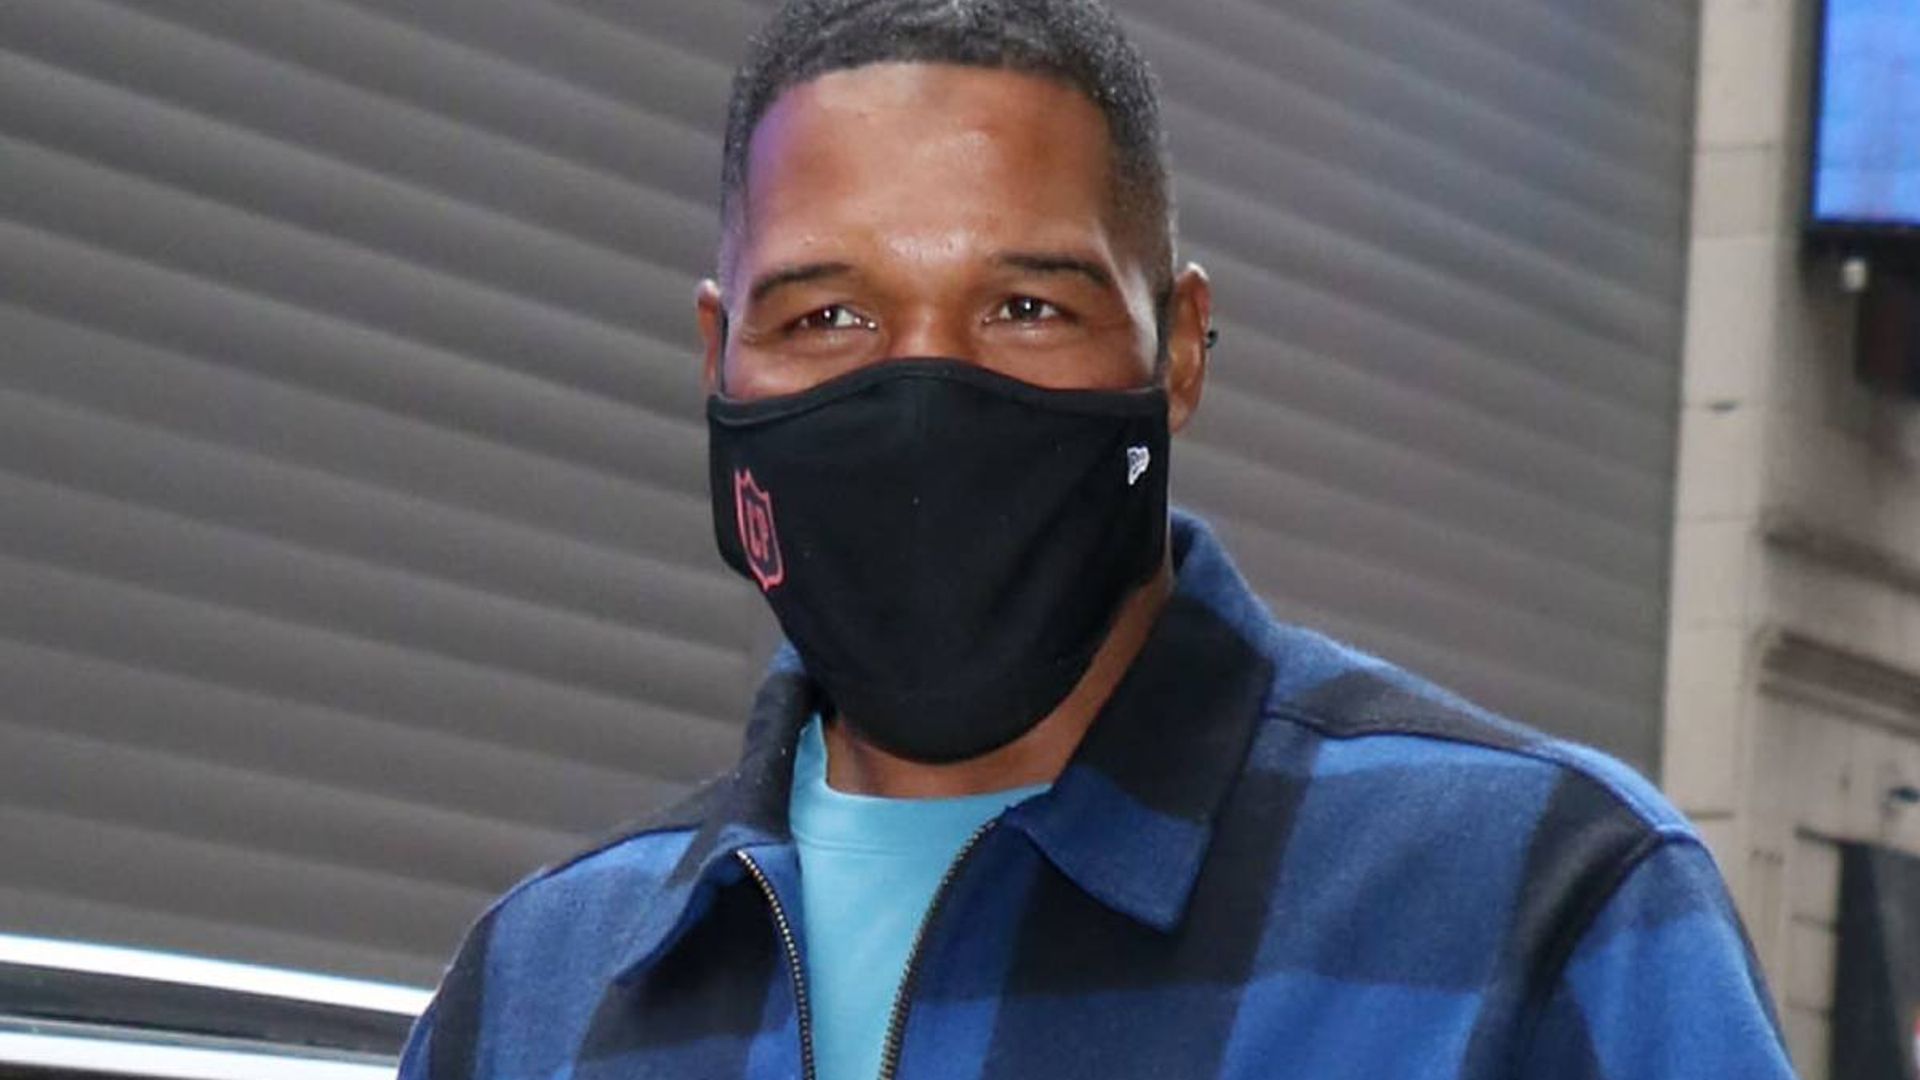 Michael Strahan teases major change to appearance in new video